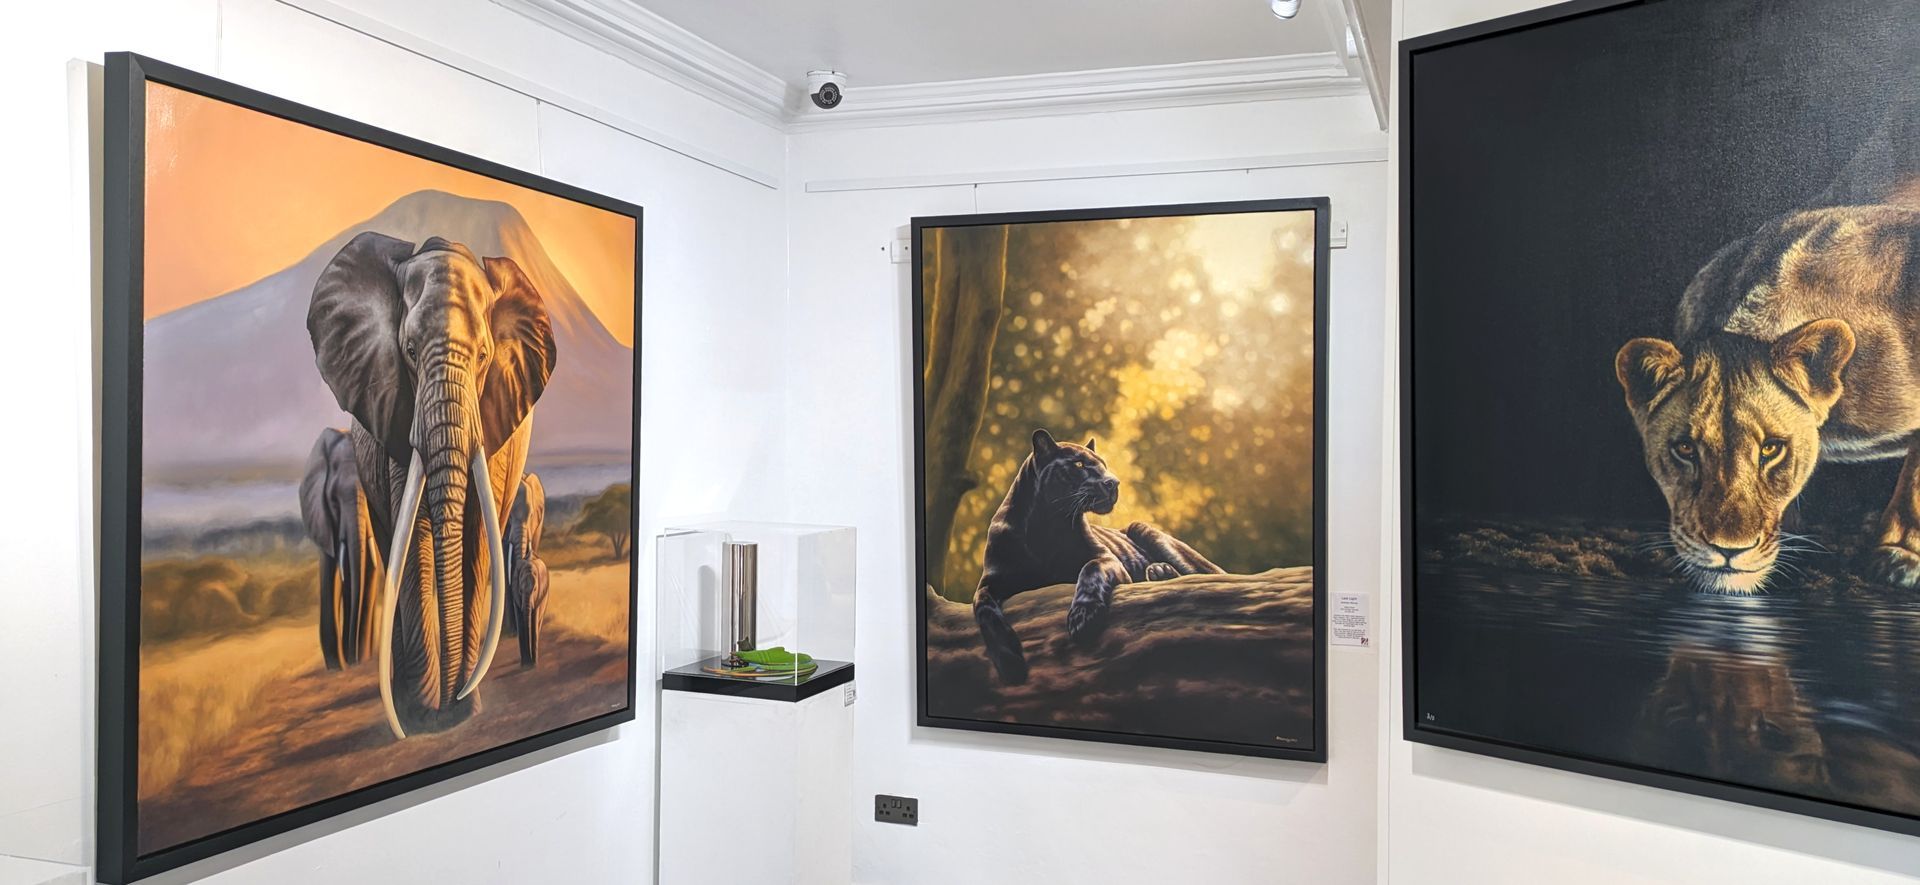 Photorealistic wildlife paintings by Kirsten Mirreyu of a lion, a panther and an elephant herd on display at Watson Gallery Edinburgh